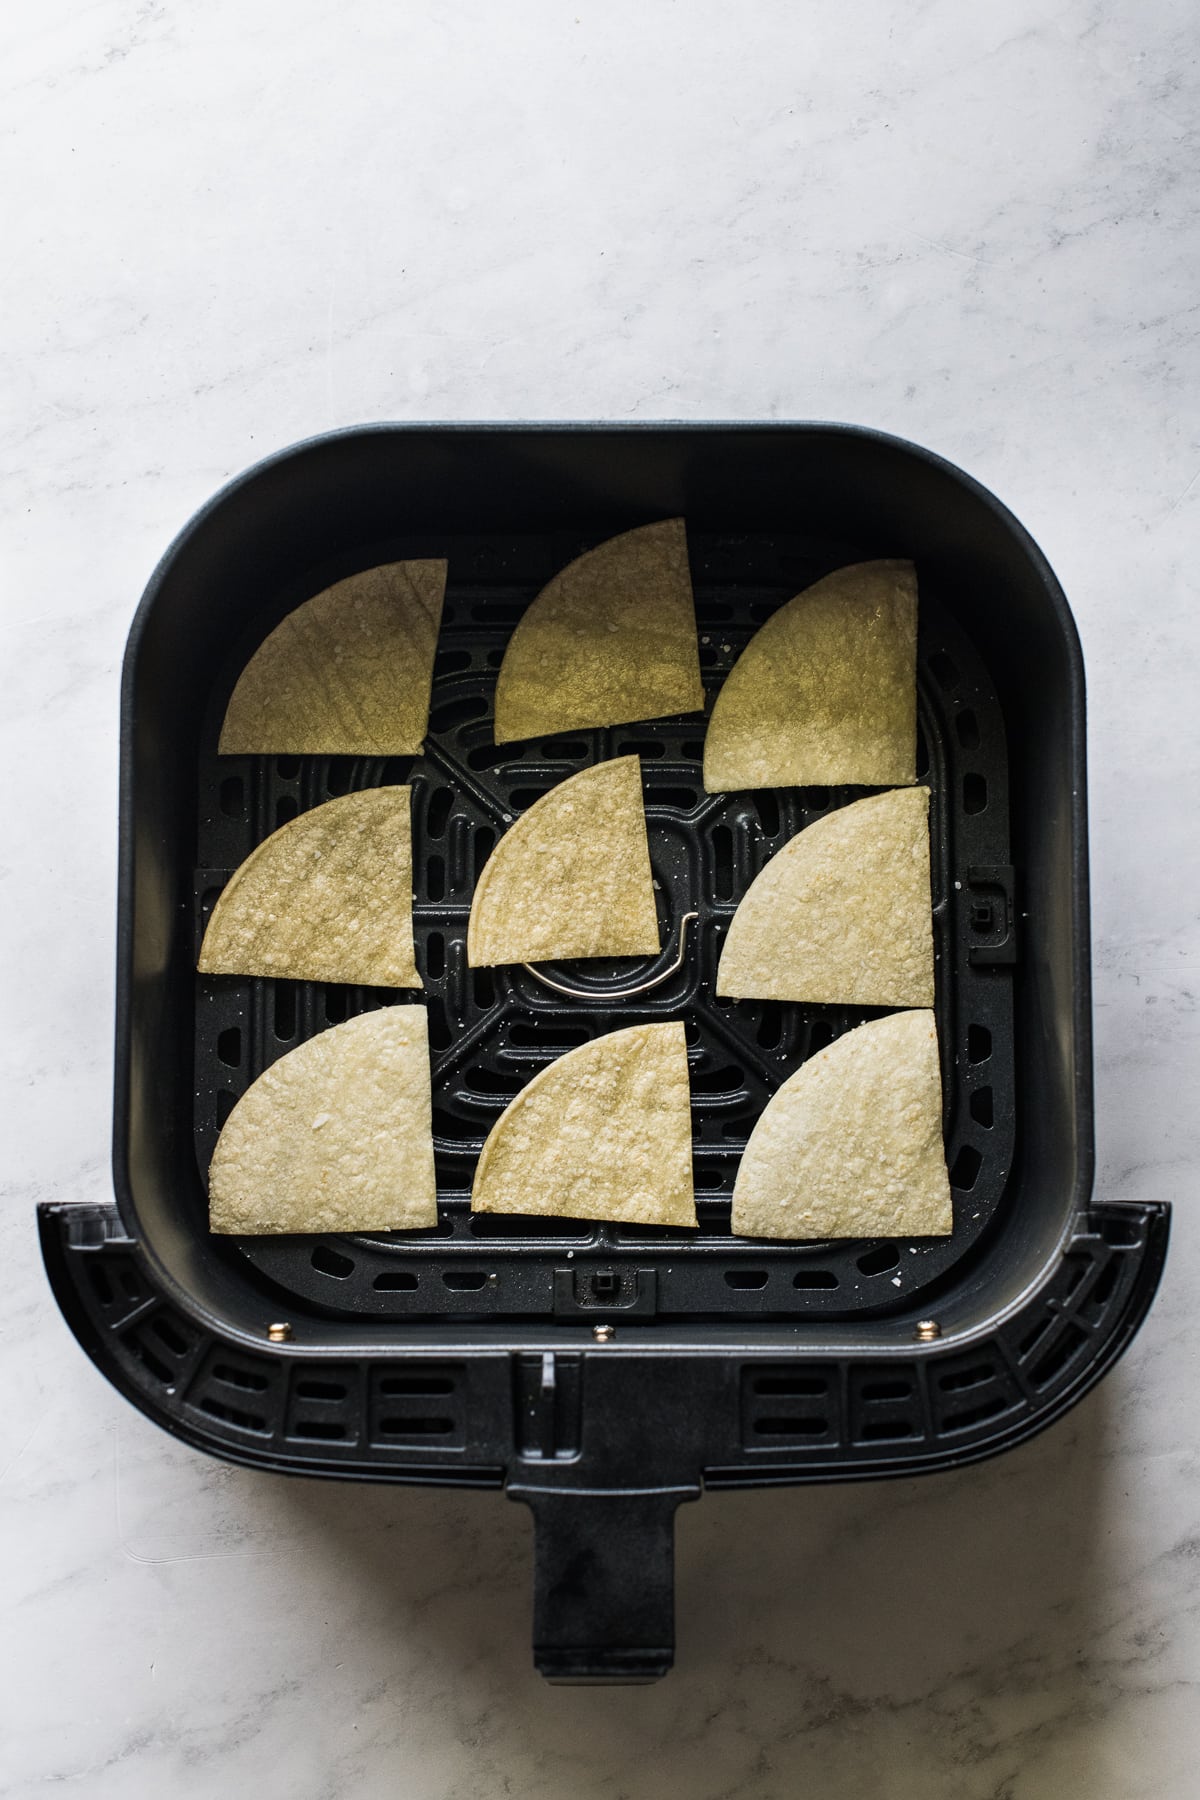 Corn tortillas cut into chips in the basket of an air fryer.